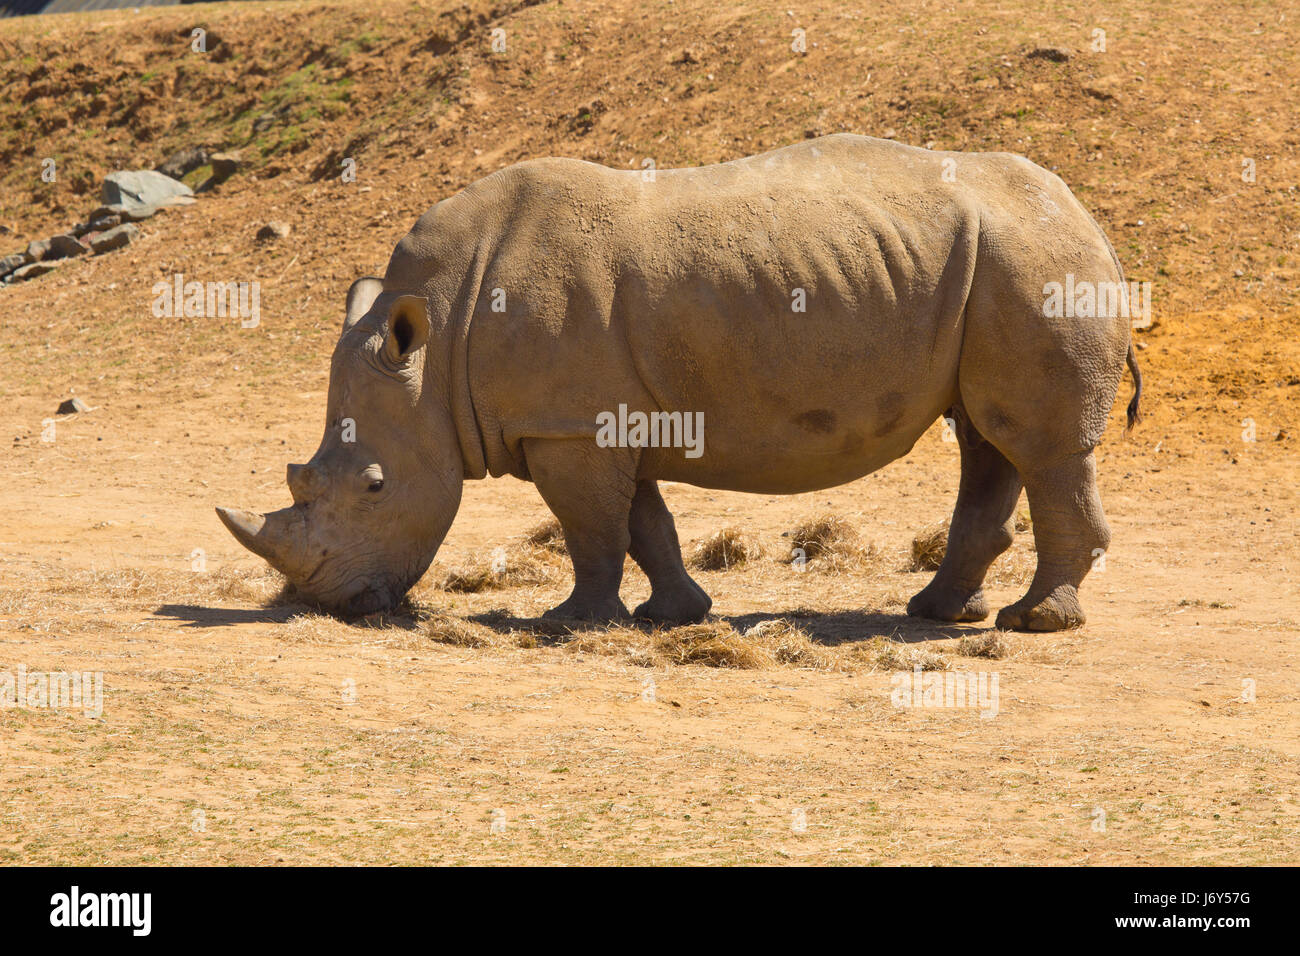 An african white rhino grazing on some dry grass Stock Photo